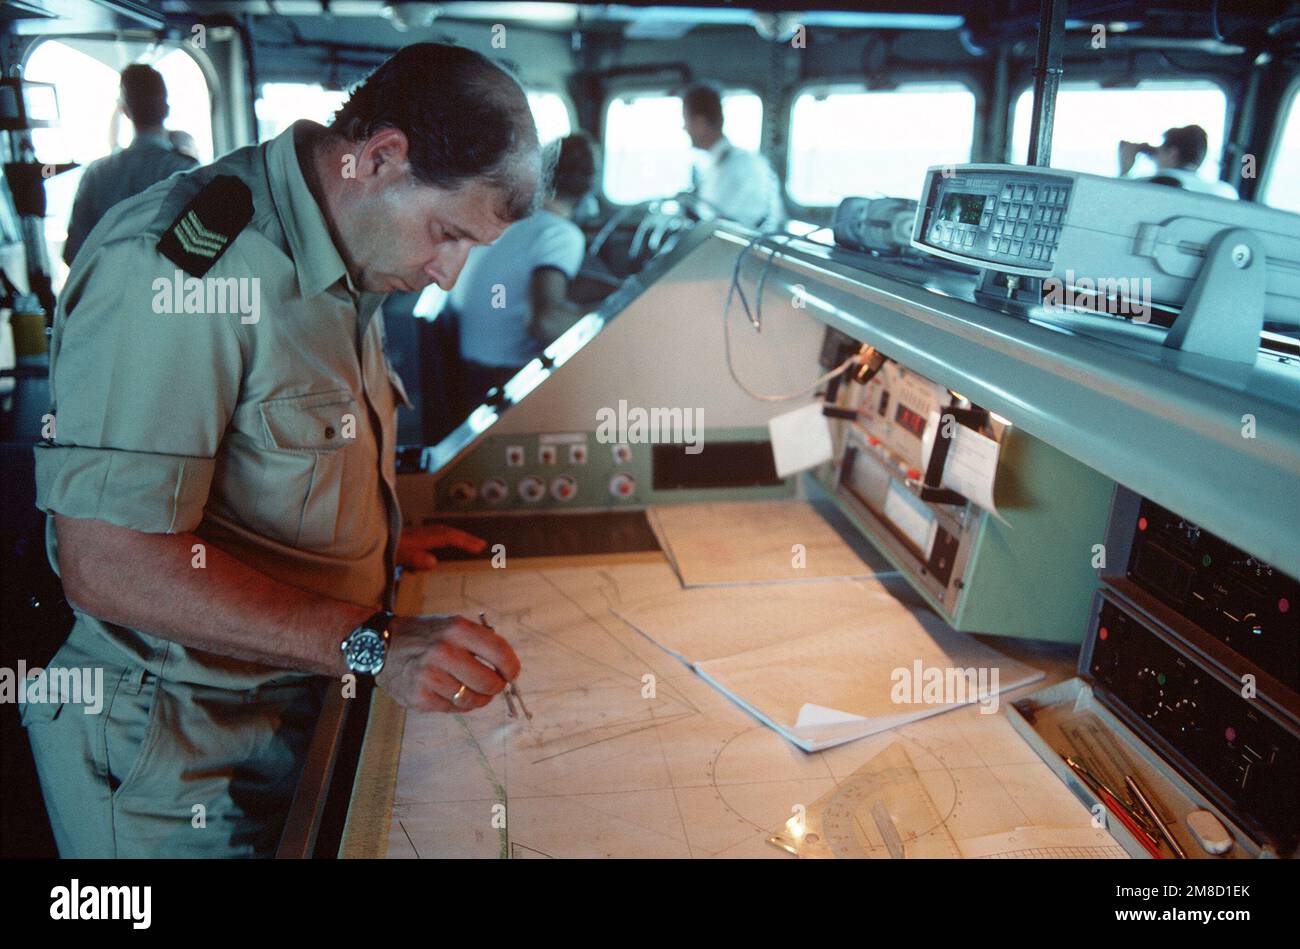 A Dutch navy officer plots coordinates on a grid on the bridge of the frigate HR MS CALLENBURGH (F-808) during Fleet Ex 1-90. Subject Operation/Series: FLEET EX 1-90 Base: Hr Ms Callenburgh (F-808) Country: Atlantic Ocean (AOC) Stock Photo